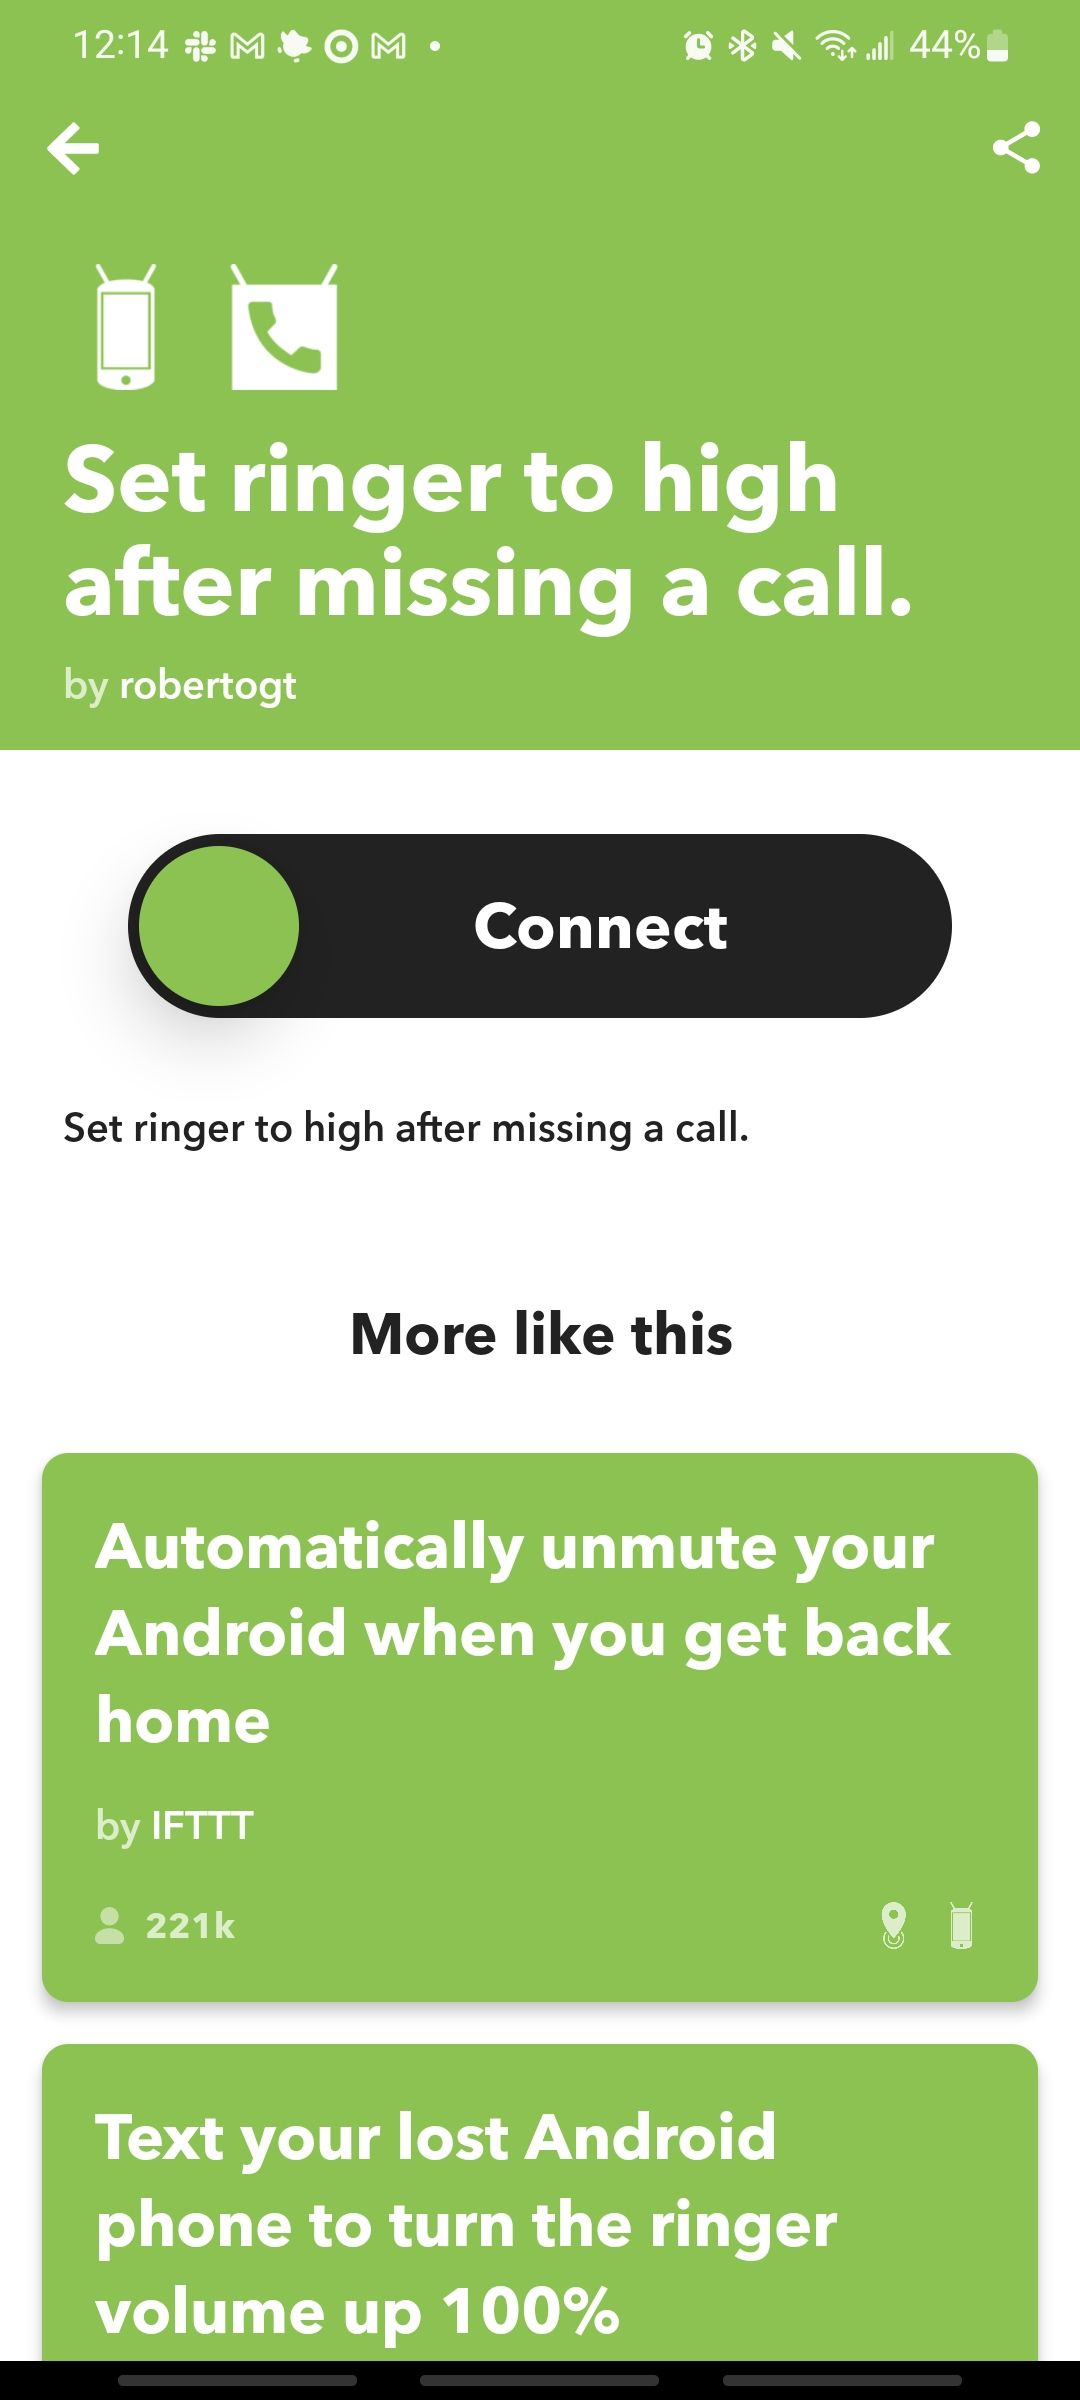 set your ringer to high after missing a call applet in ifttt app